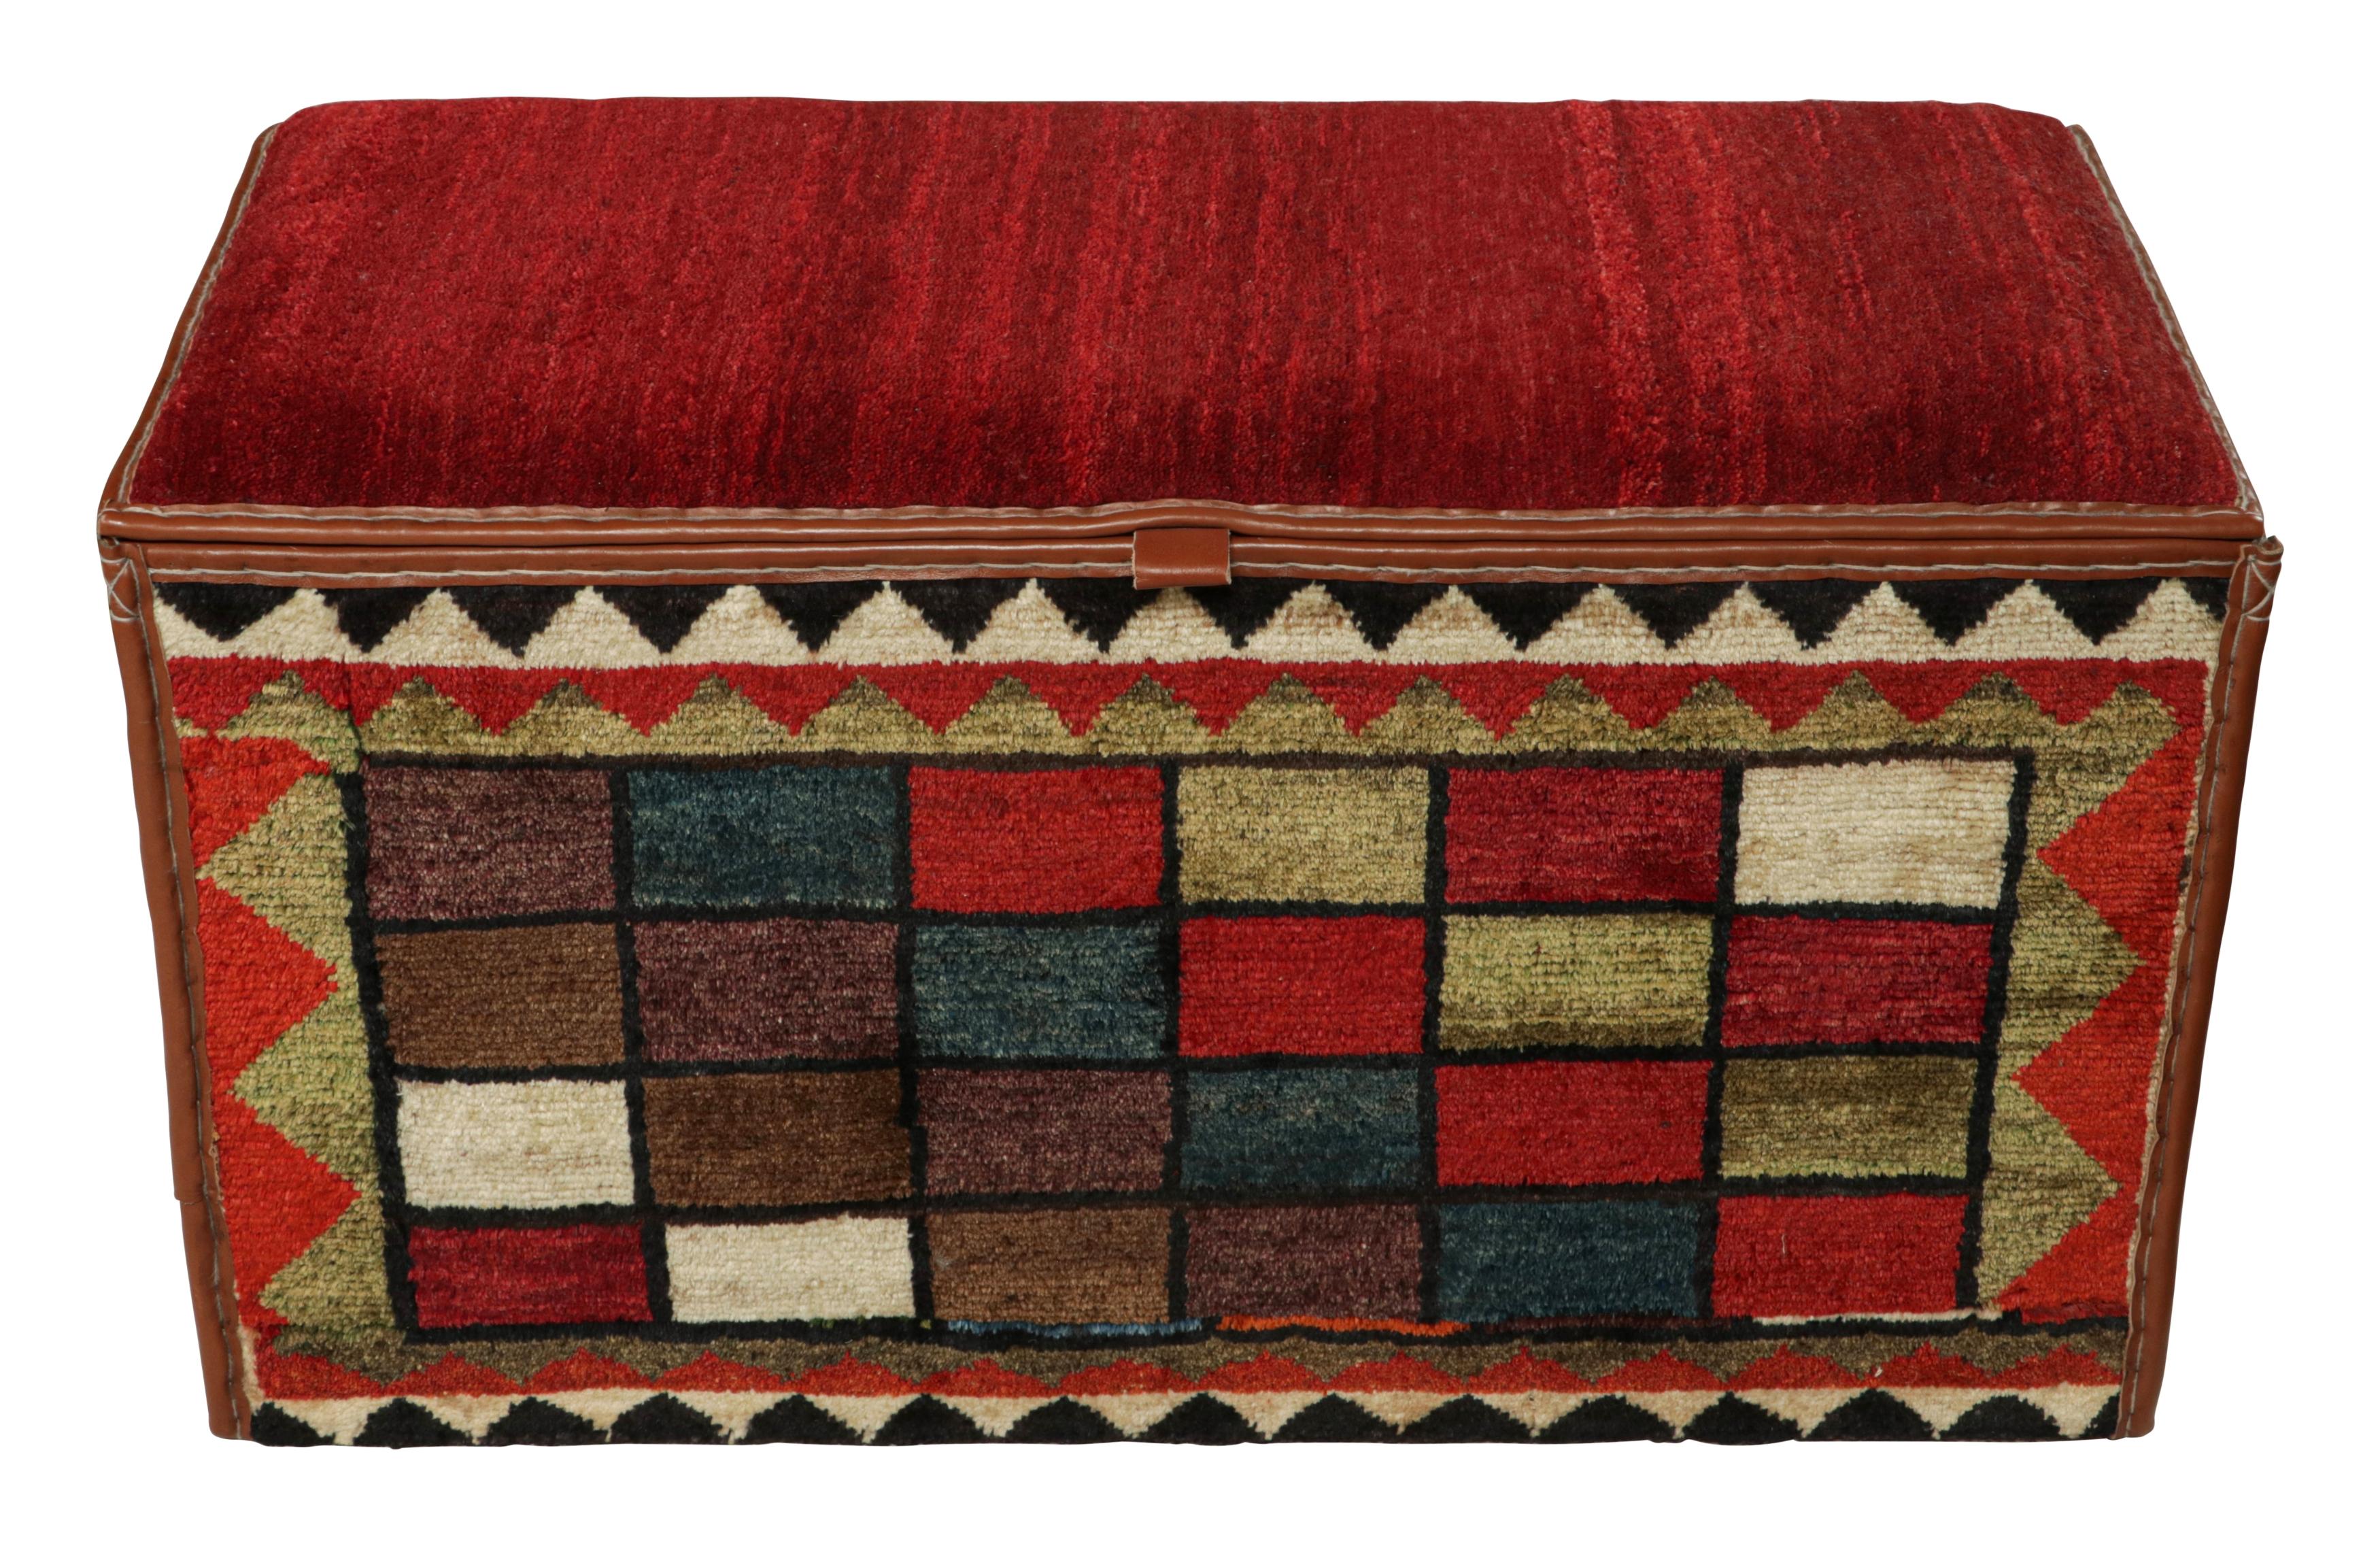 This storage chest is a collectible item in a rare new series from Rug & Kilim’s Modern Classics.
Further on the Design:

Keen eyes will note that all four sides employ recycled vintage Persian tribal rugs in hand-knotted wool. The base is wood, and